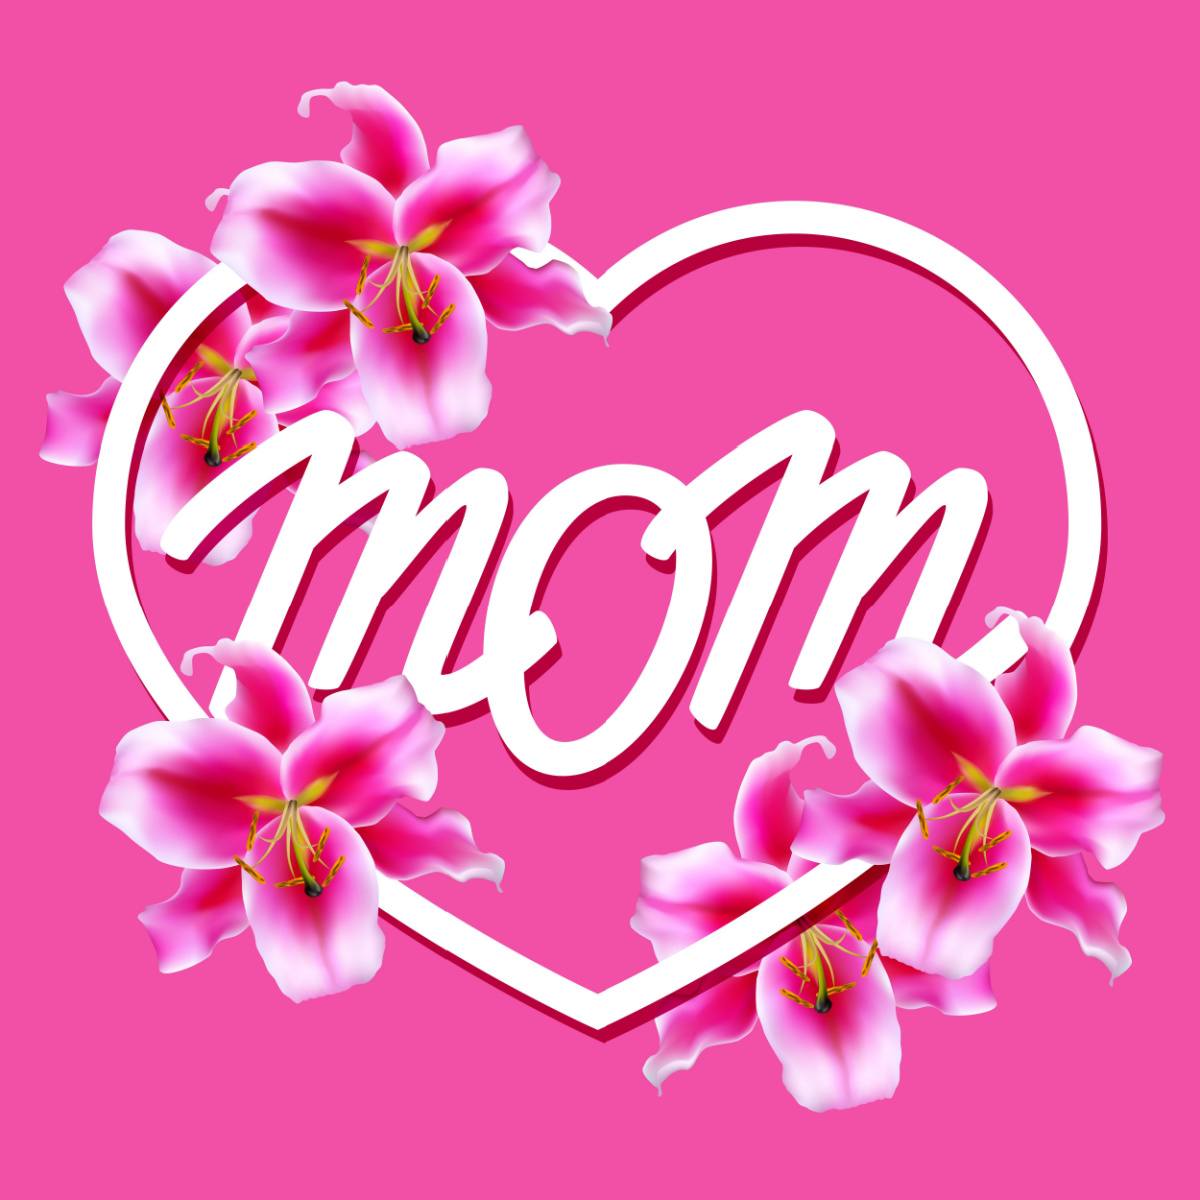 A pink background with a white heart outline surrounding the word mom, with pink day lilies touching the heart outline.